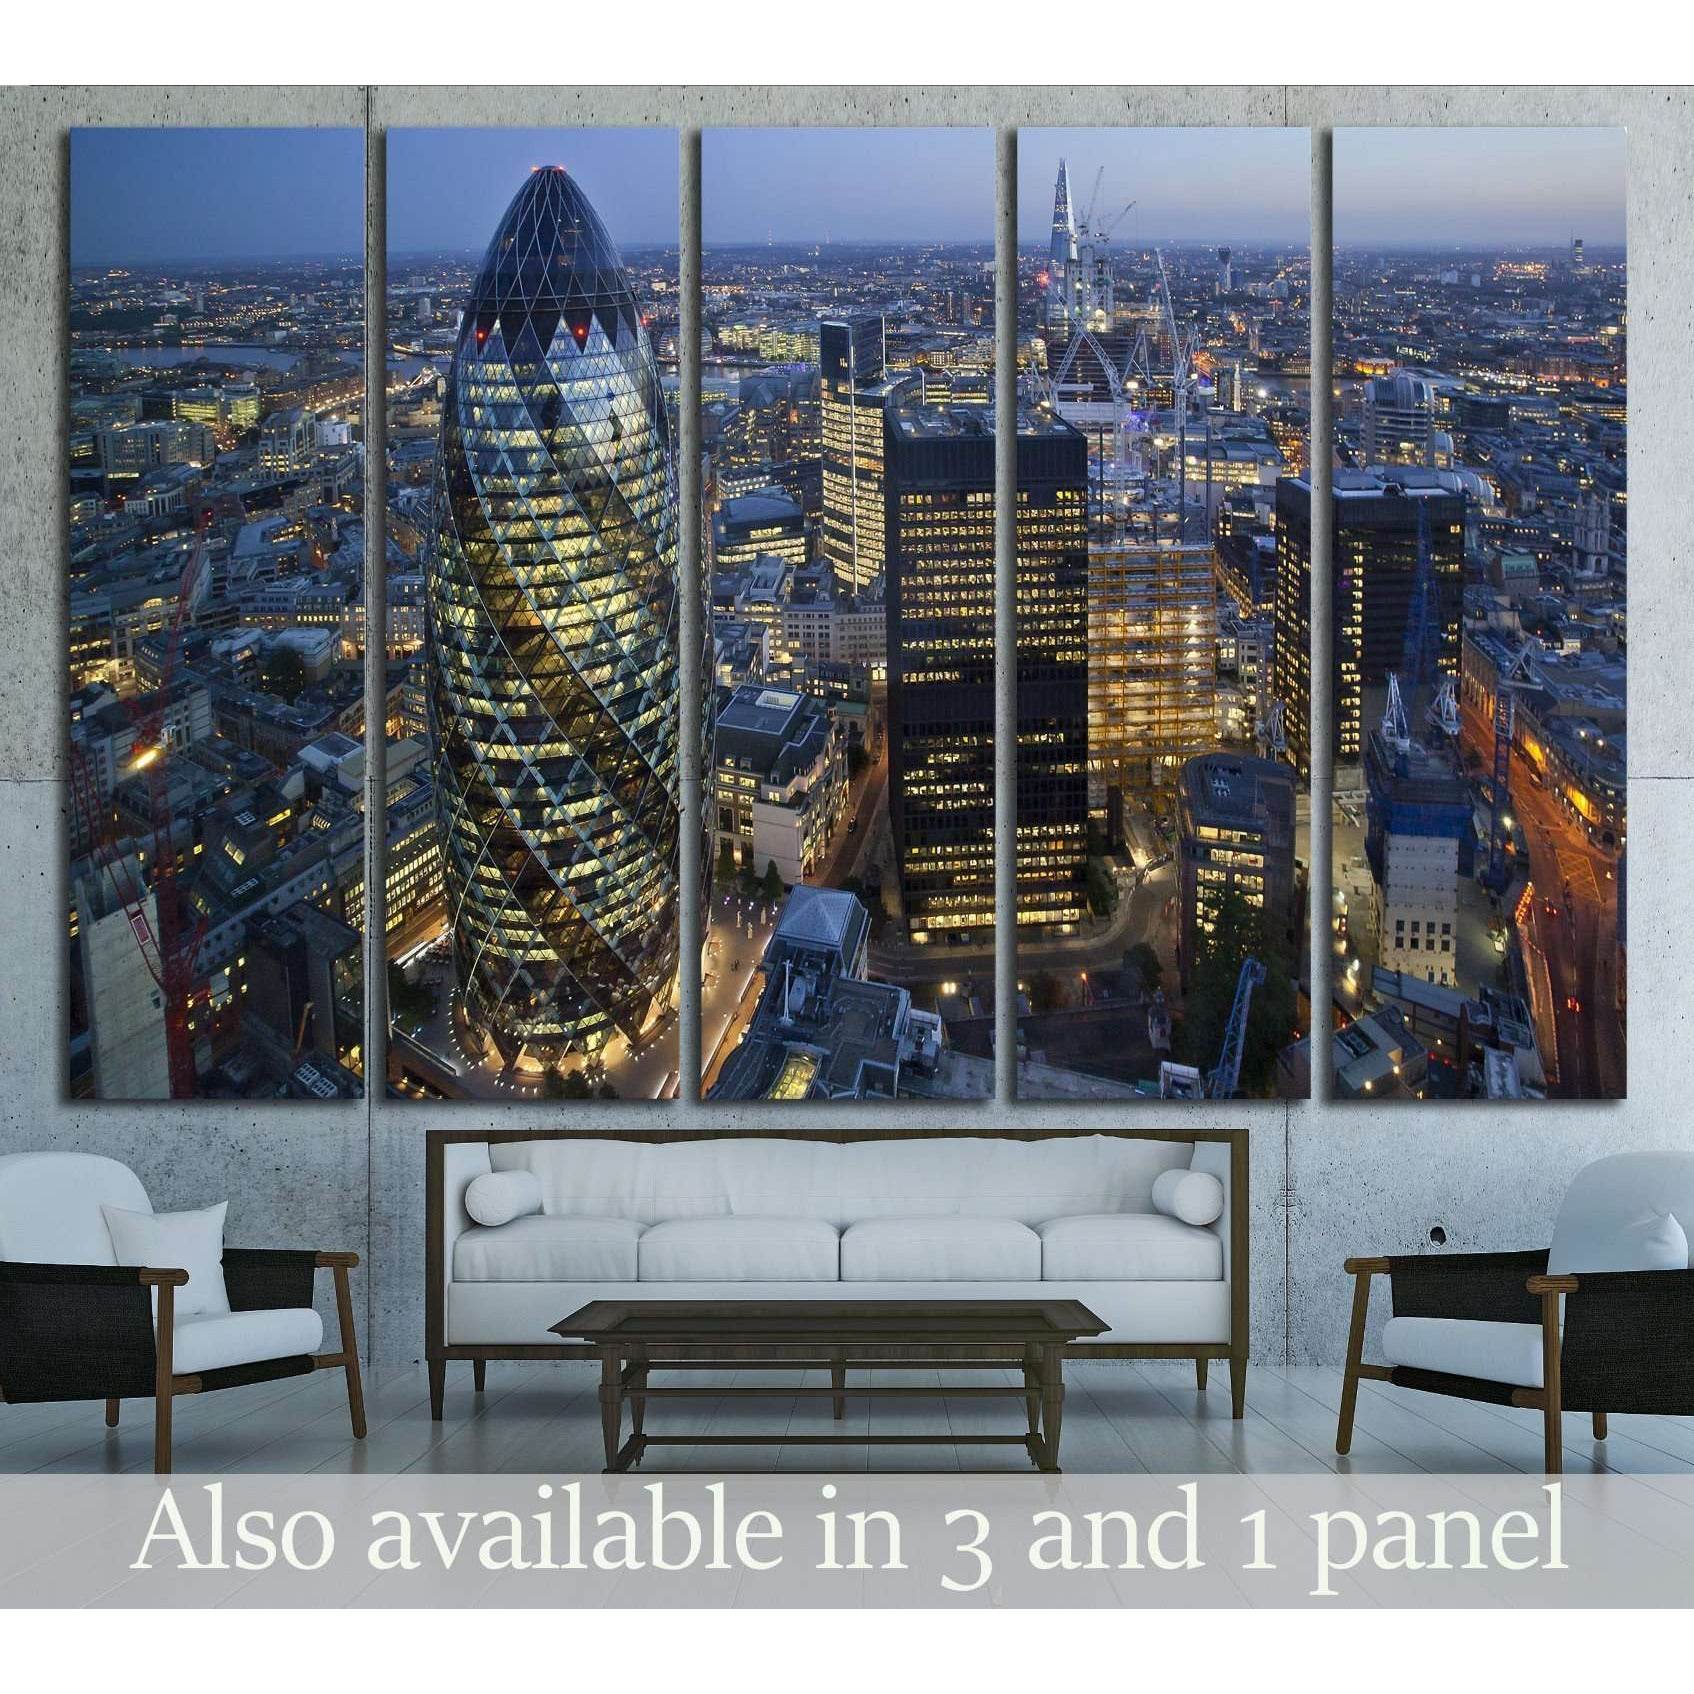 City of London Skyline At Sunse №2148 Ready to Hang Canvas Print